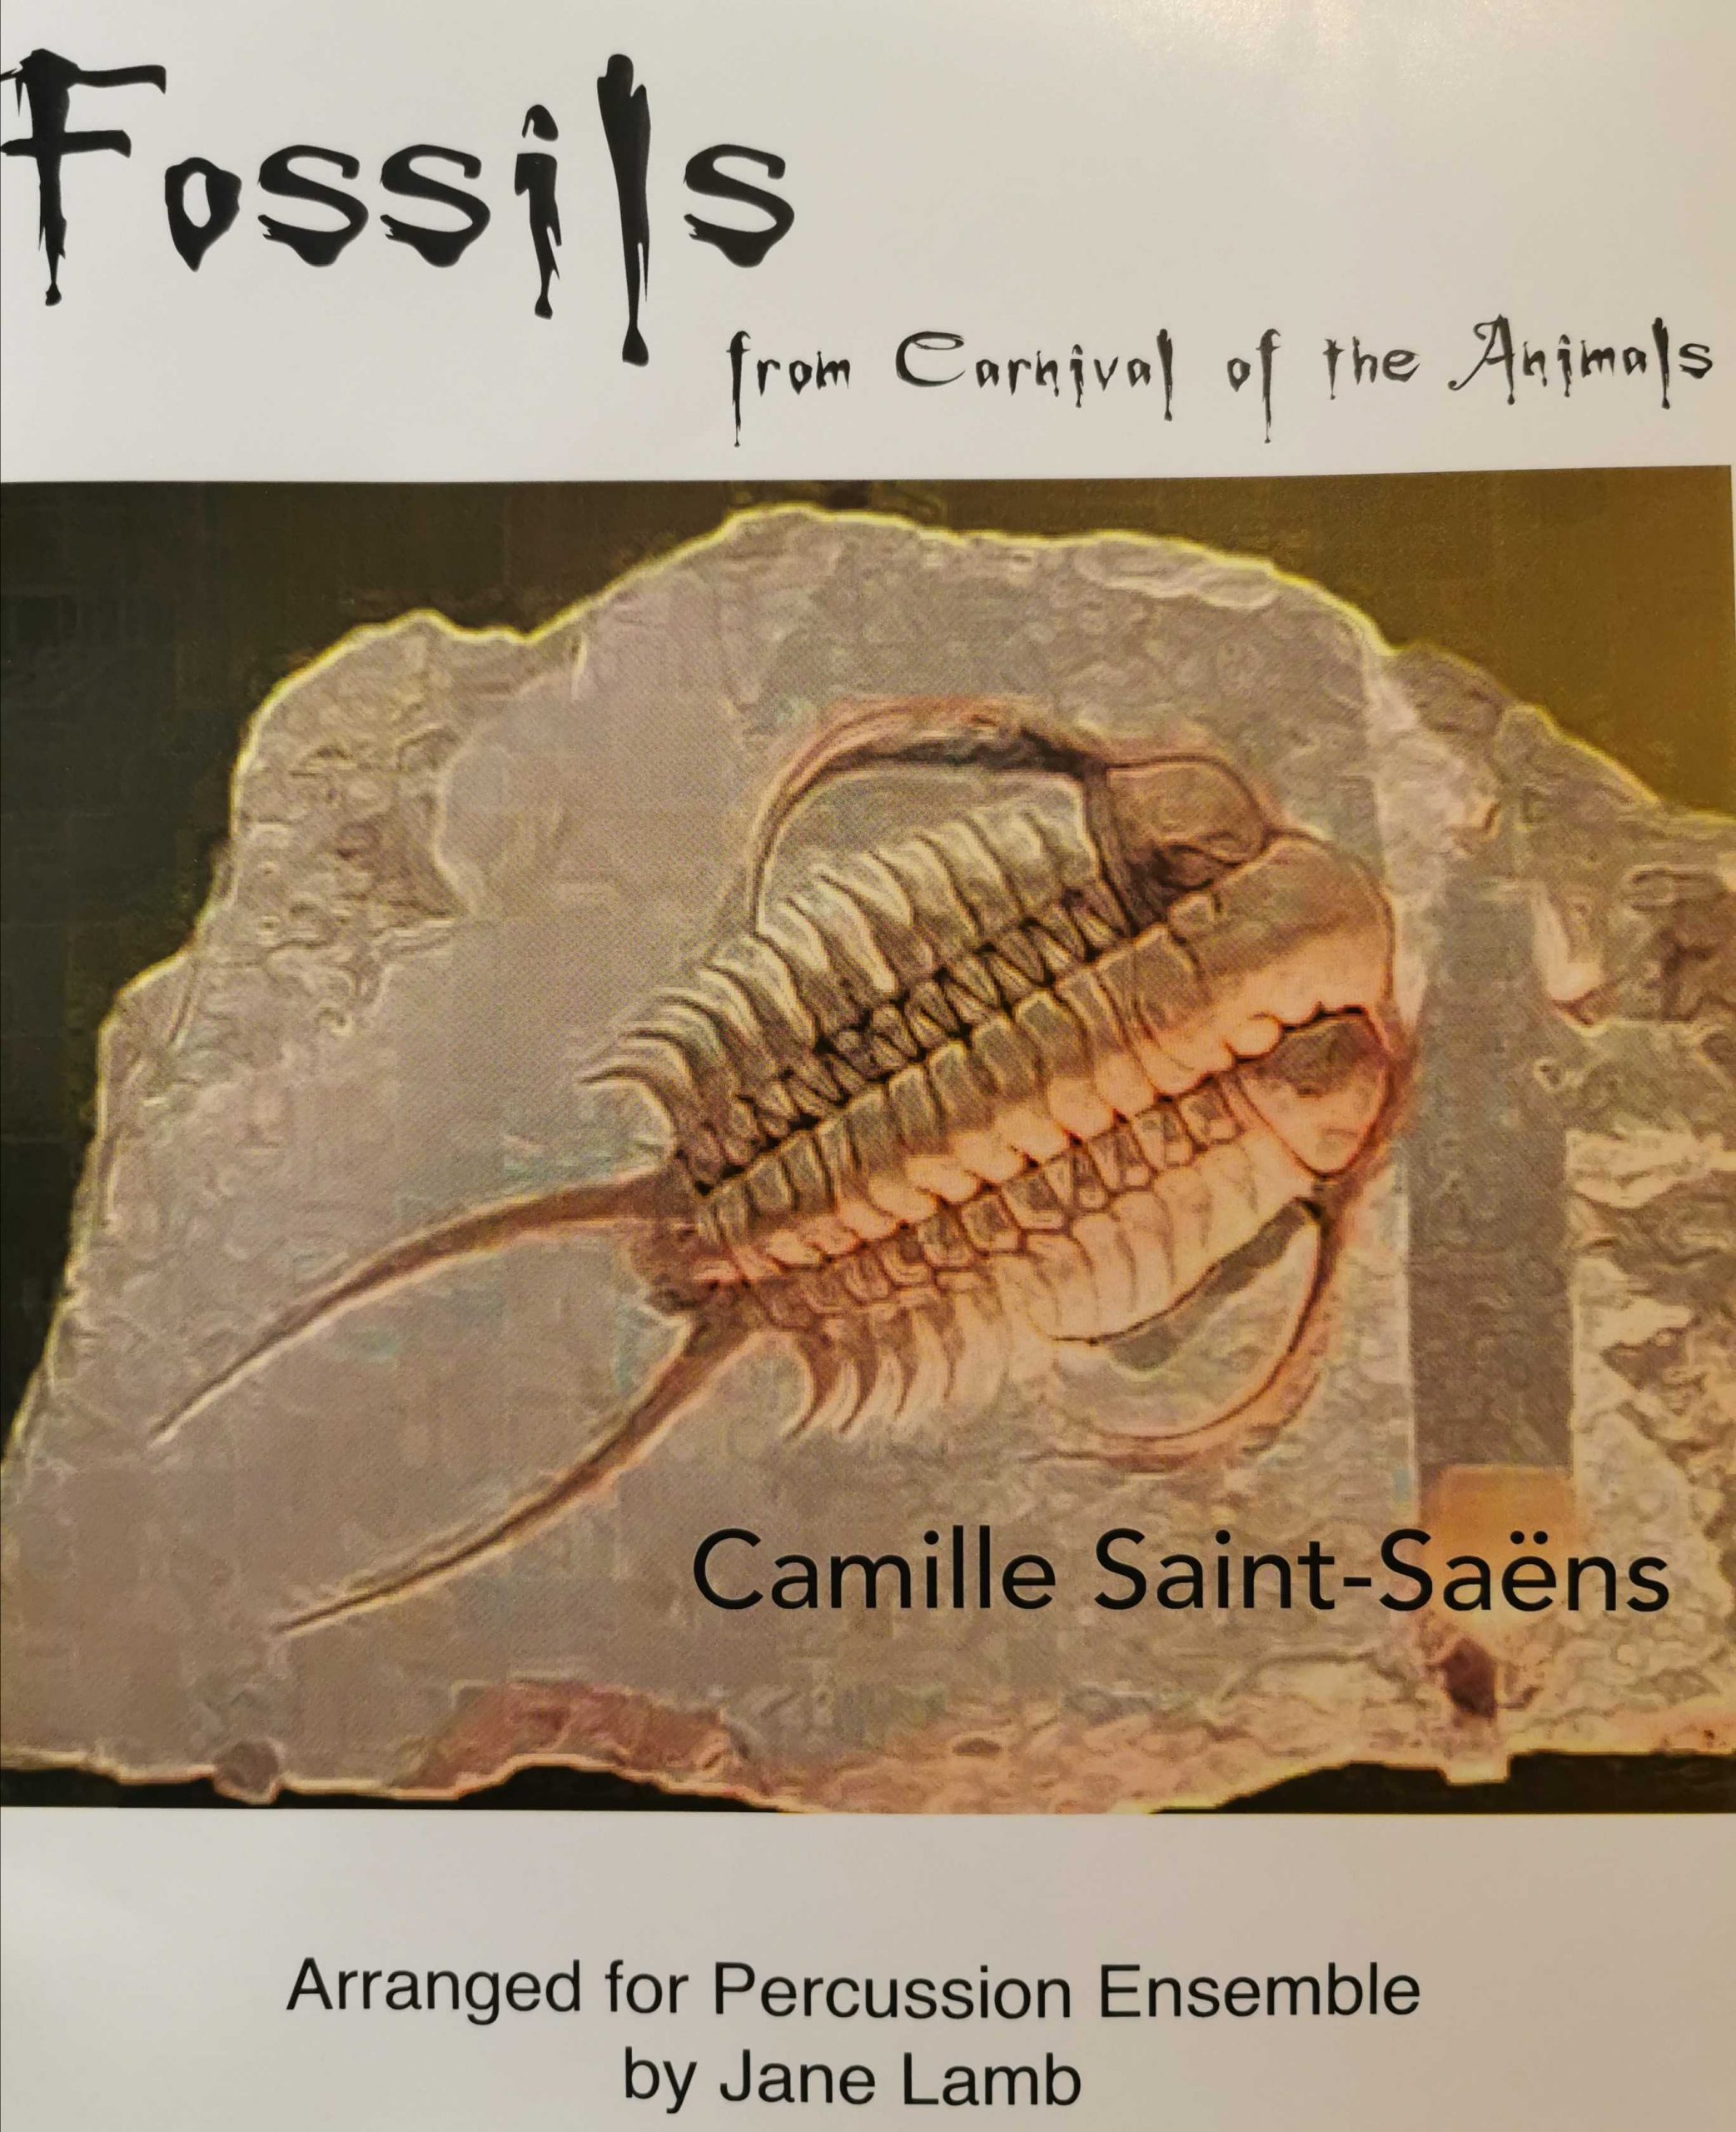 Fossils from Carival of the Animals by Saint-Seans arr. Jane Lamb